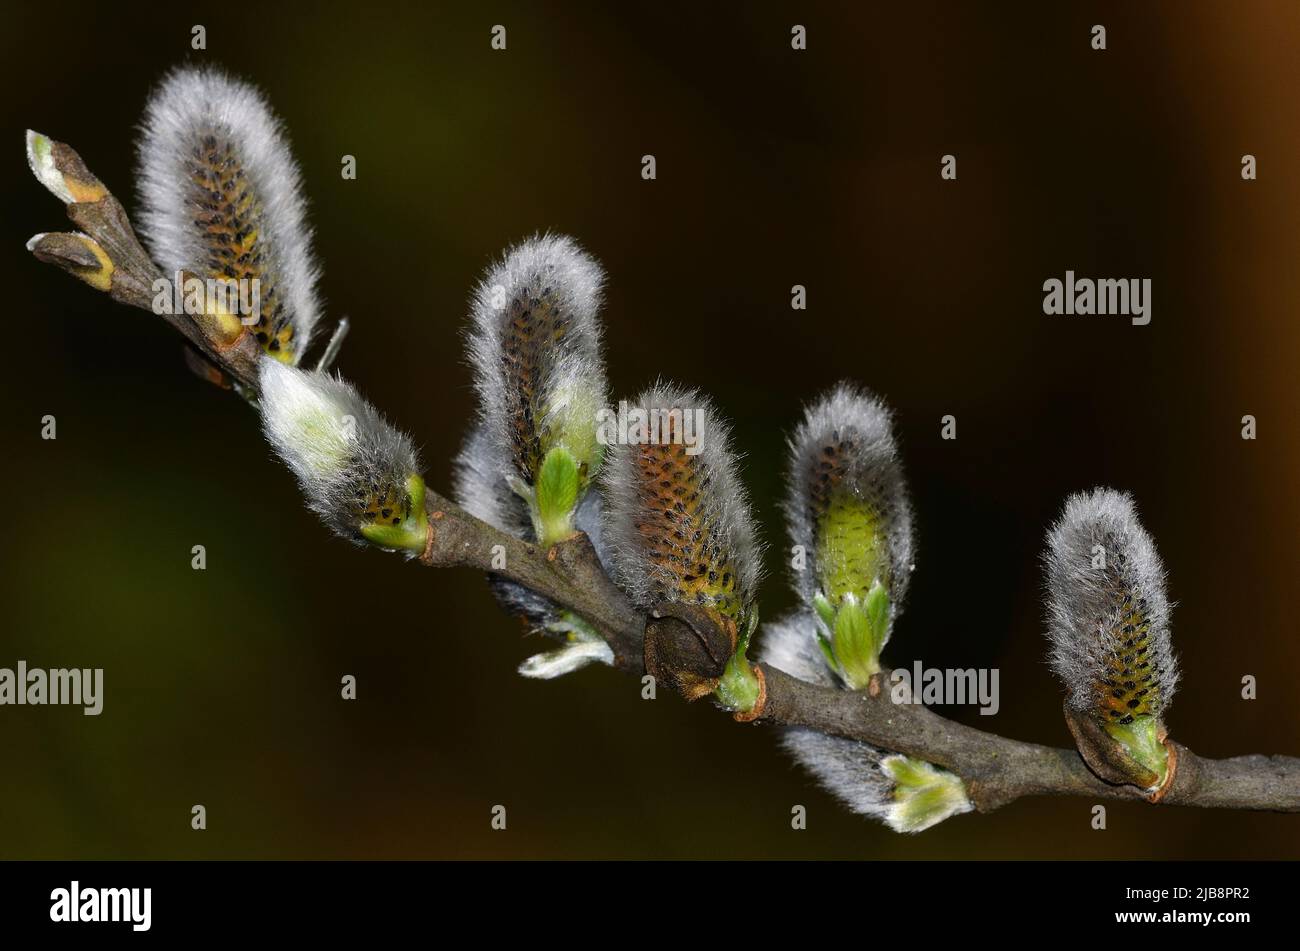 Goat willow or sallow catkins. Dorset, UK March 2020. Stock Photo